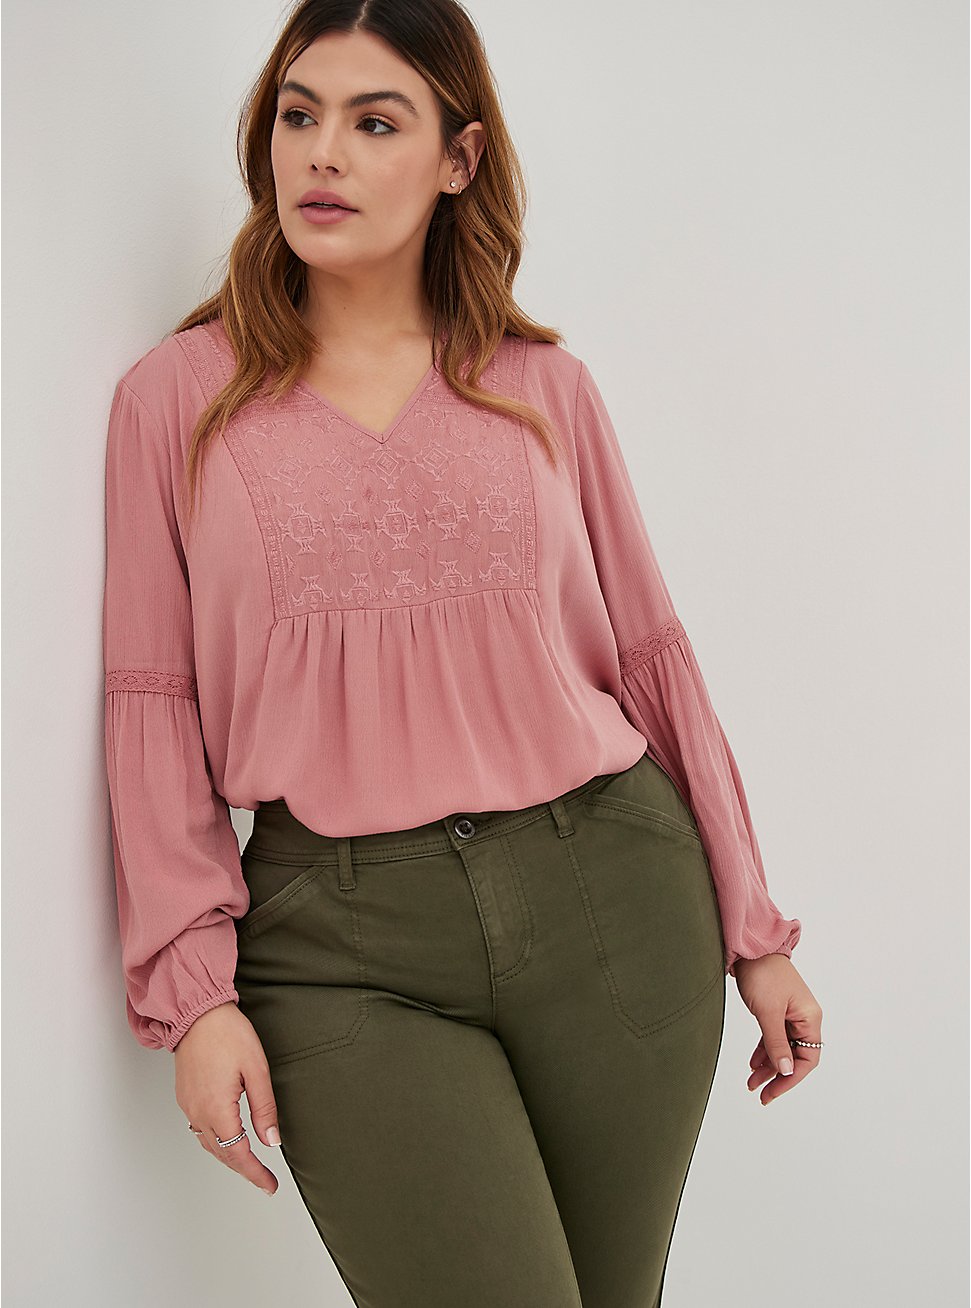 Plus Size Relaxed Fit Embroidered Blouse - Crinkle Gauze Dusty Rose, DUSTY ROSE, hi-res